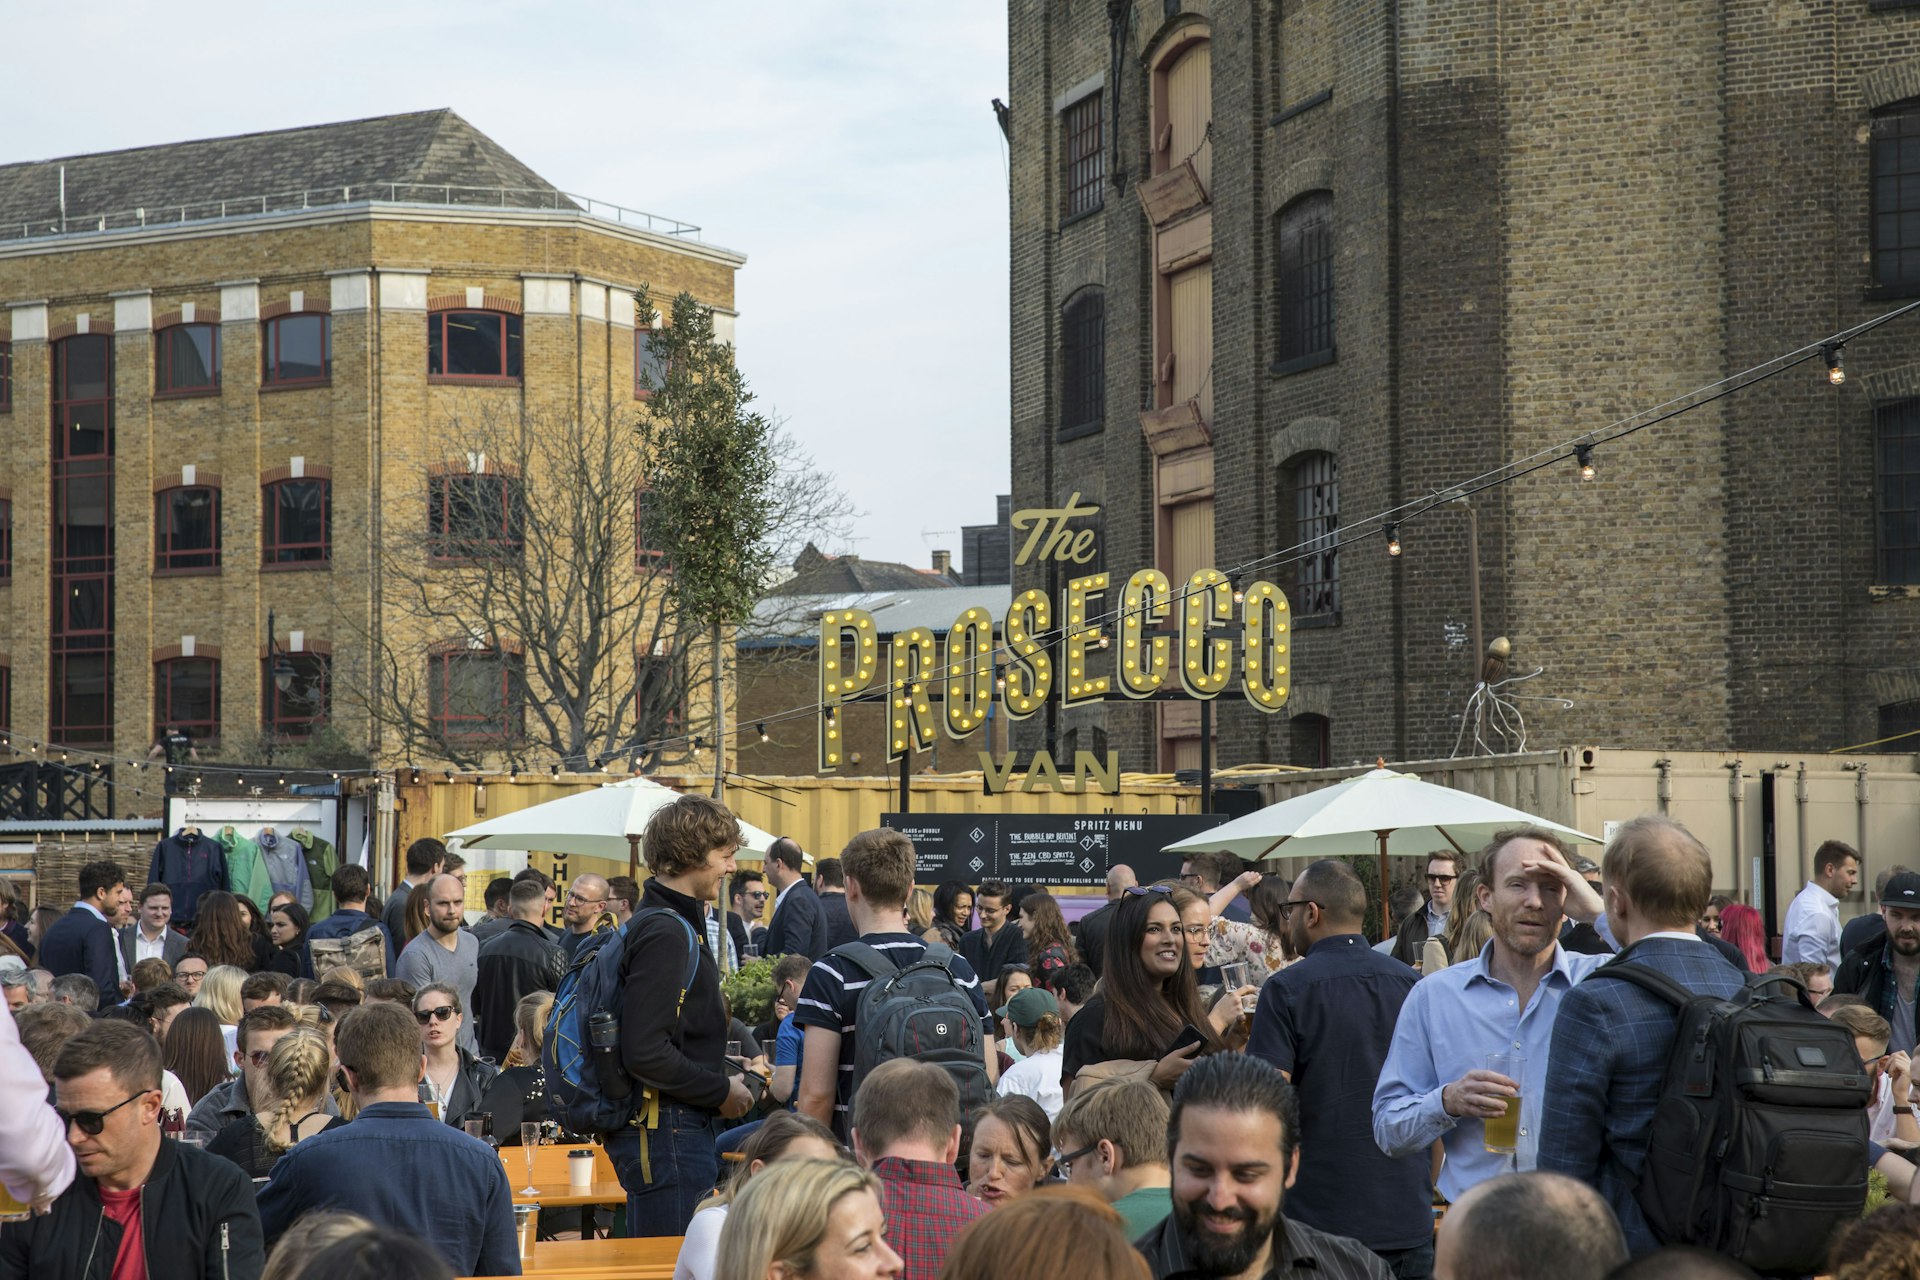 Industrial-looking brick buildings are the backdrop to a busy market scene, where people holding drinks mill between food stalls at London's Vinegar Yard market